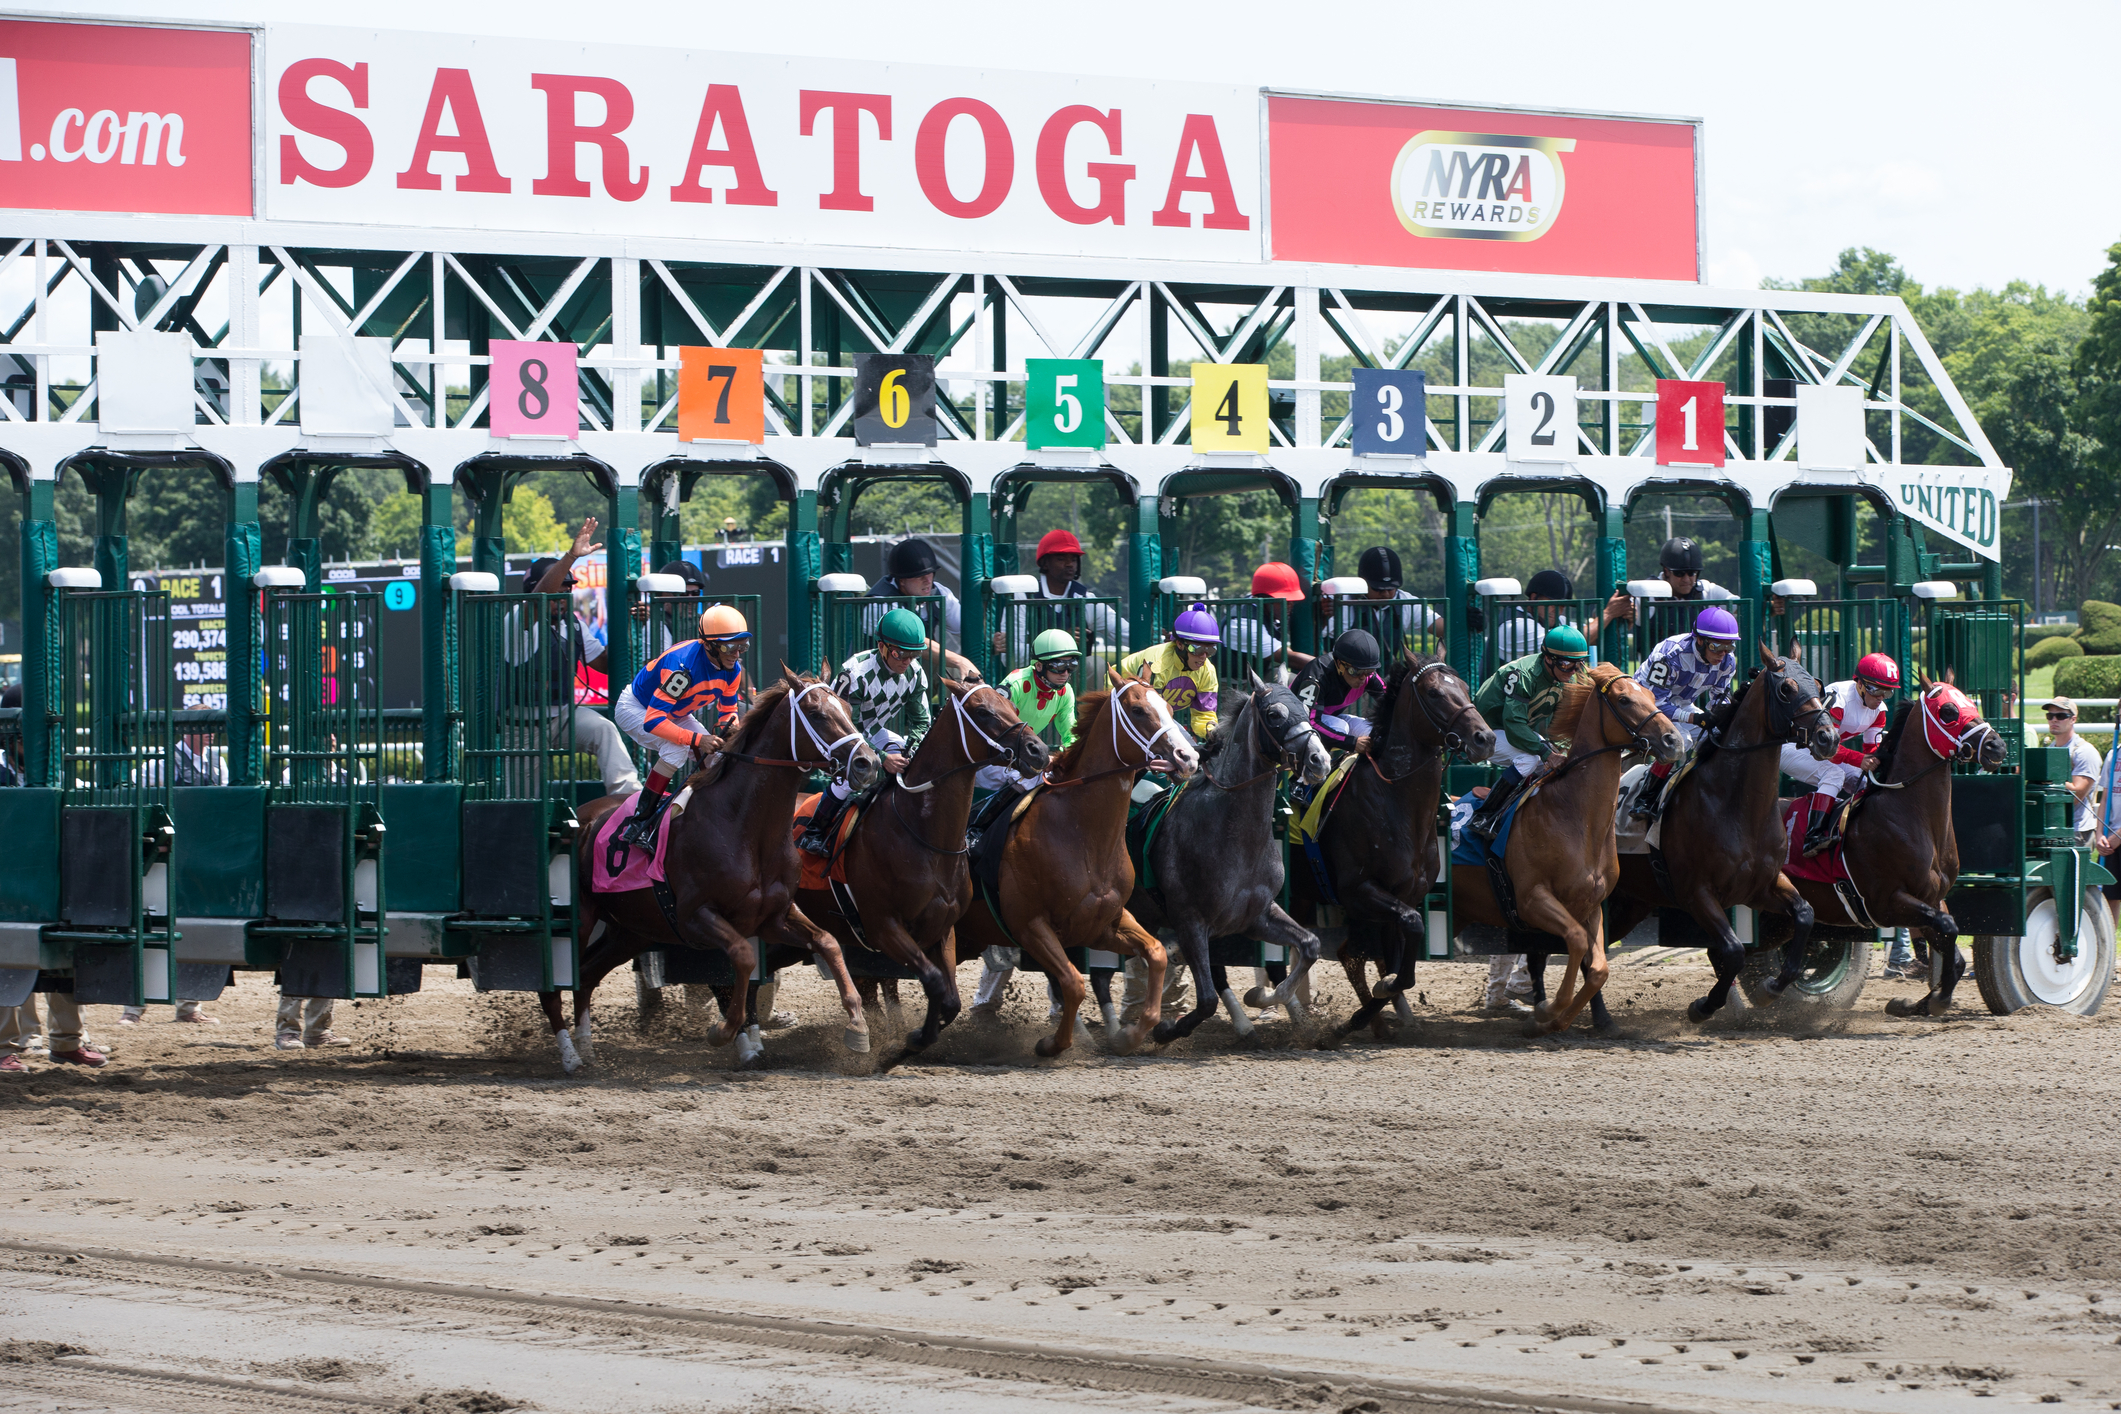 Things to do in Saratoga